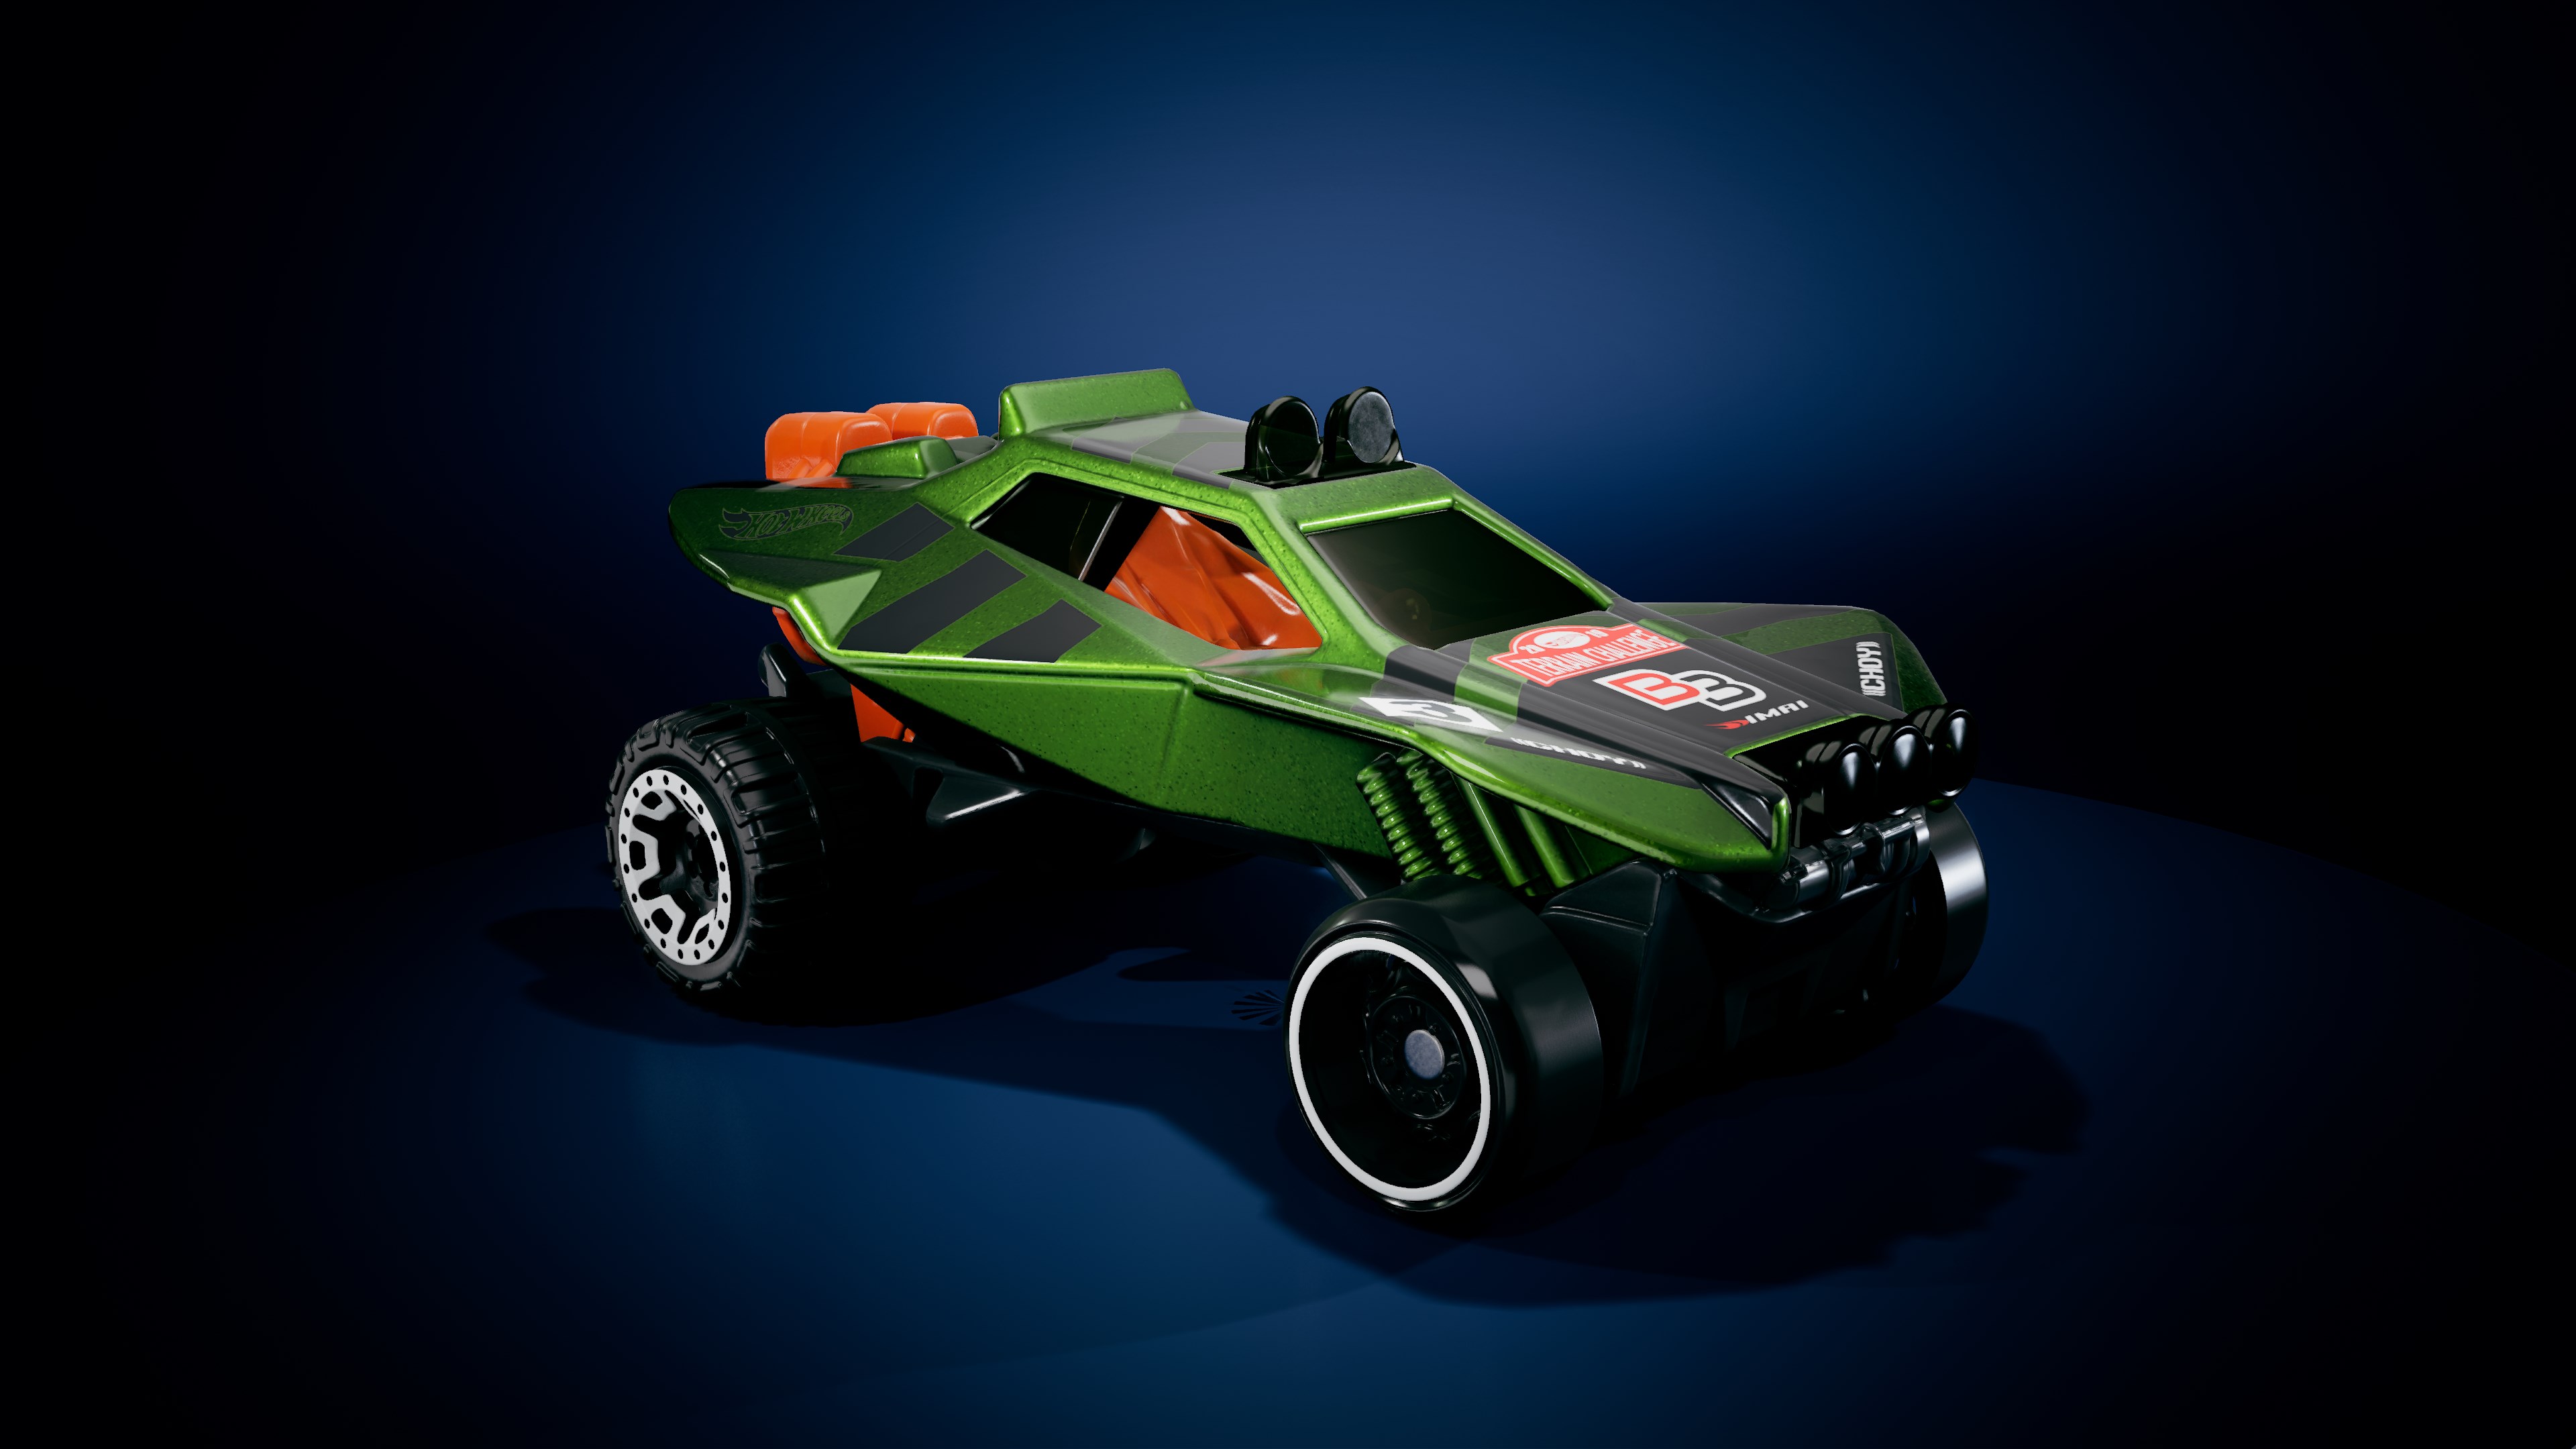 hot wheels unleashed ™ download